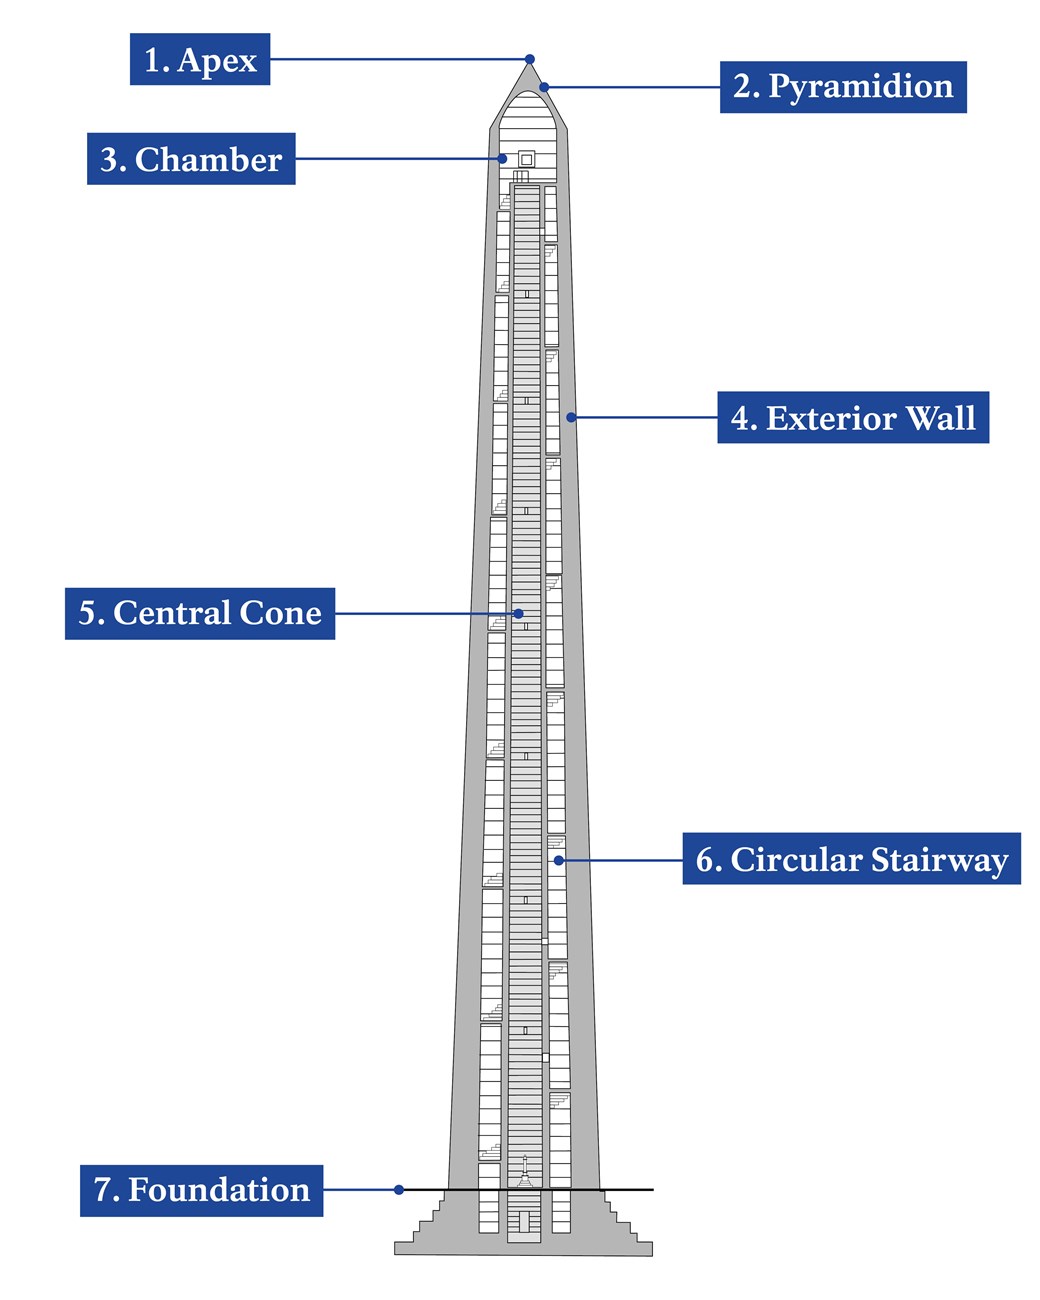 A diagram of the interior of the Bunker Hill Monument, showing the circular stairway and, central core, foundation, and chamber at the top of the Monument. Its labels are provided on the webpage.